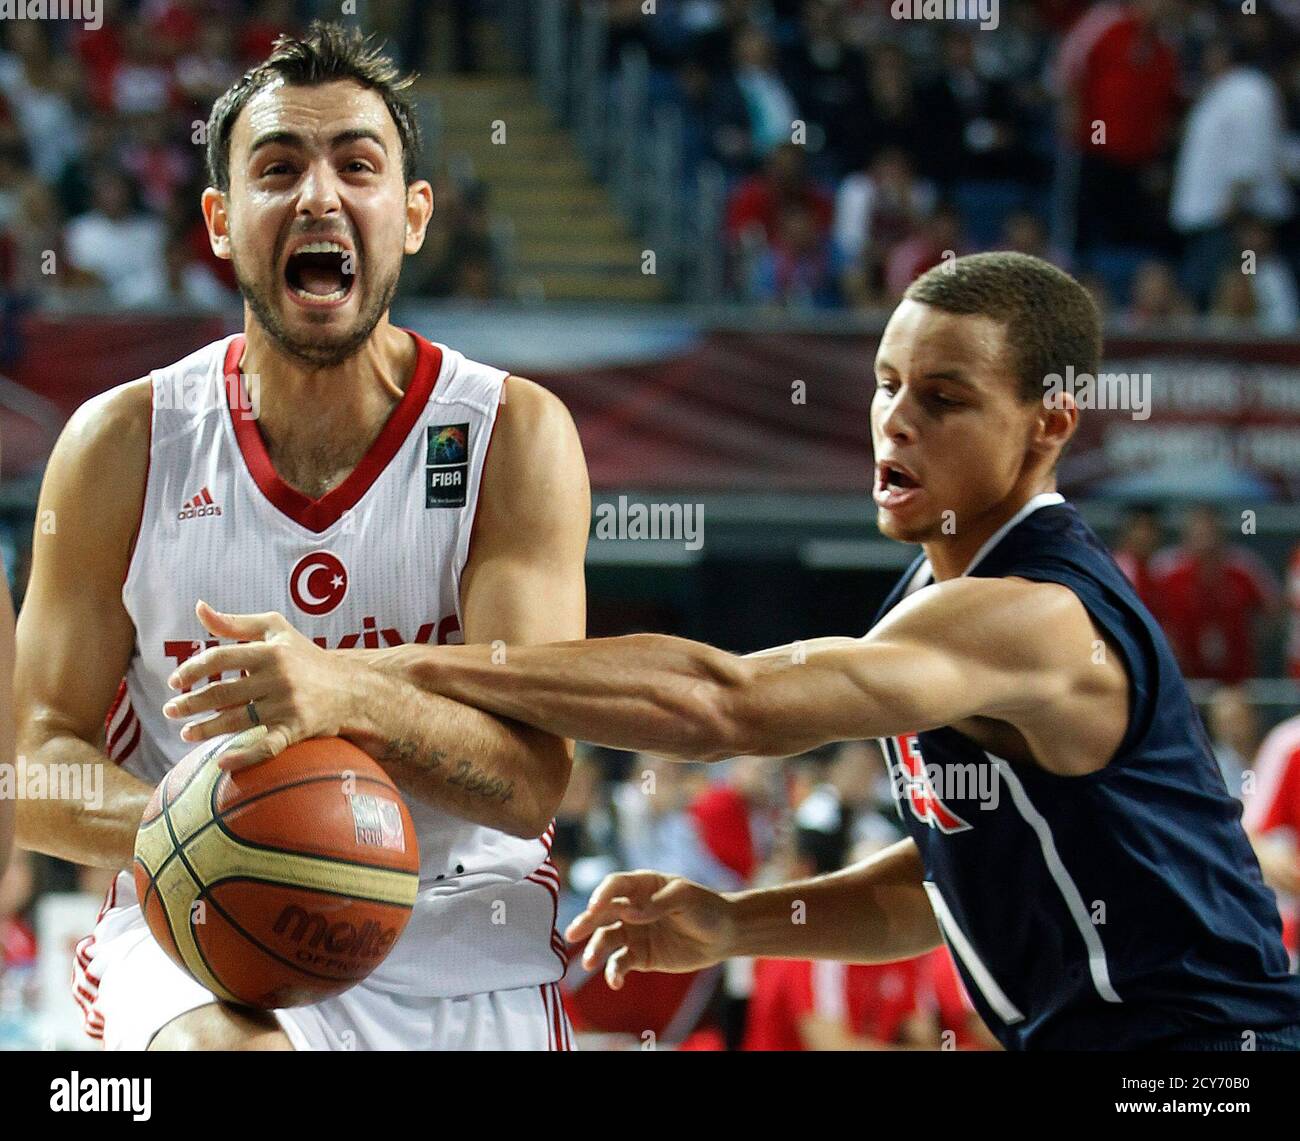 Turkey's Ender Arslan (L) runs with the ball while being blocked by U.S. Stephen Curry (R) during their FIBA Basketball World Championship final game in Istanbul September 12, 2010.        REUTERS/Jeff Haynes (TURKEY  - Tags: SPORT BASKETBALL) Stock Photo